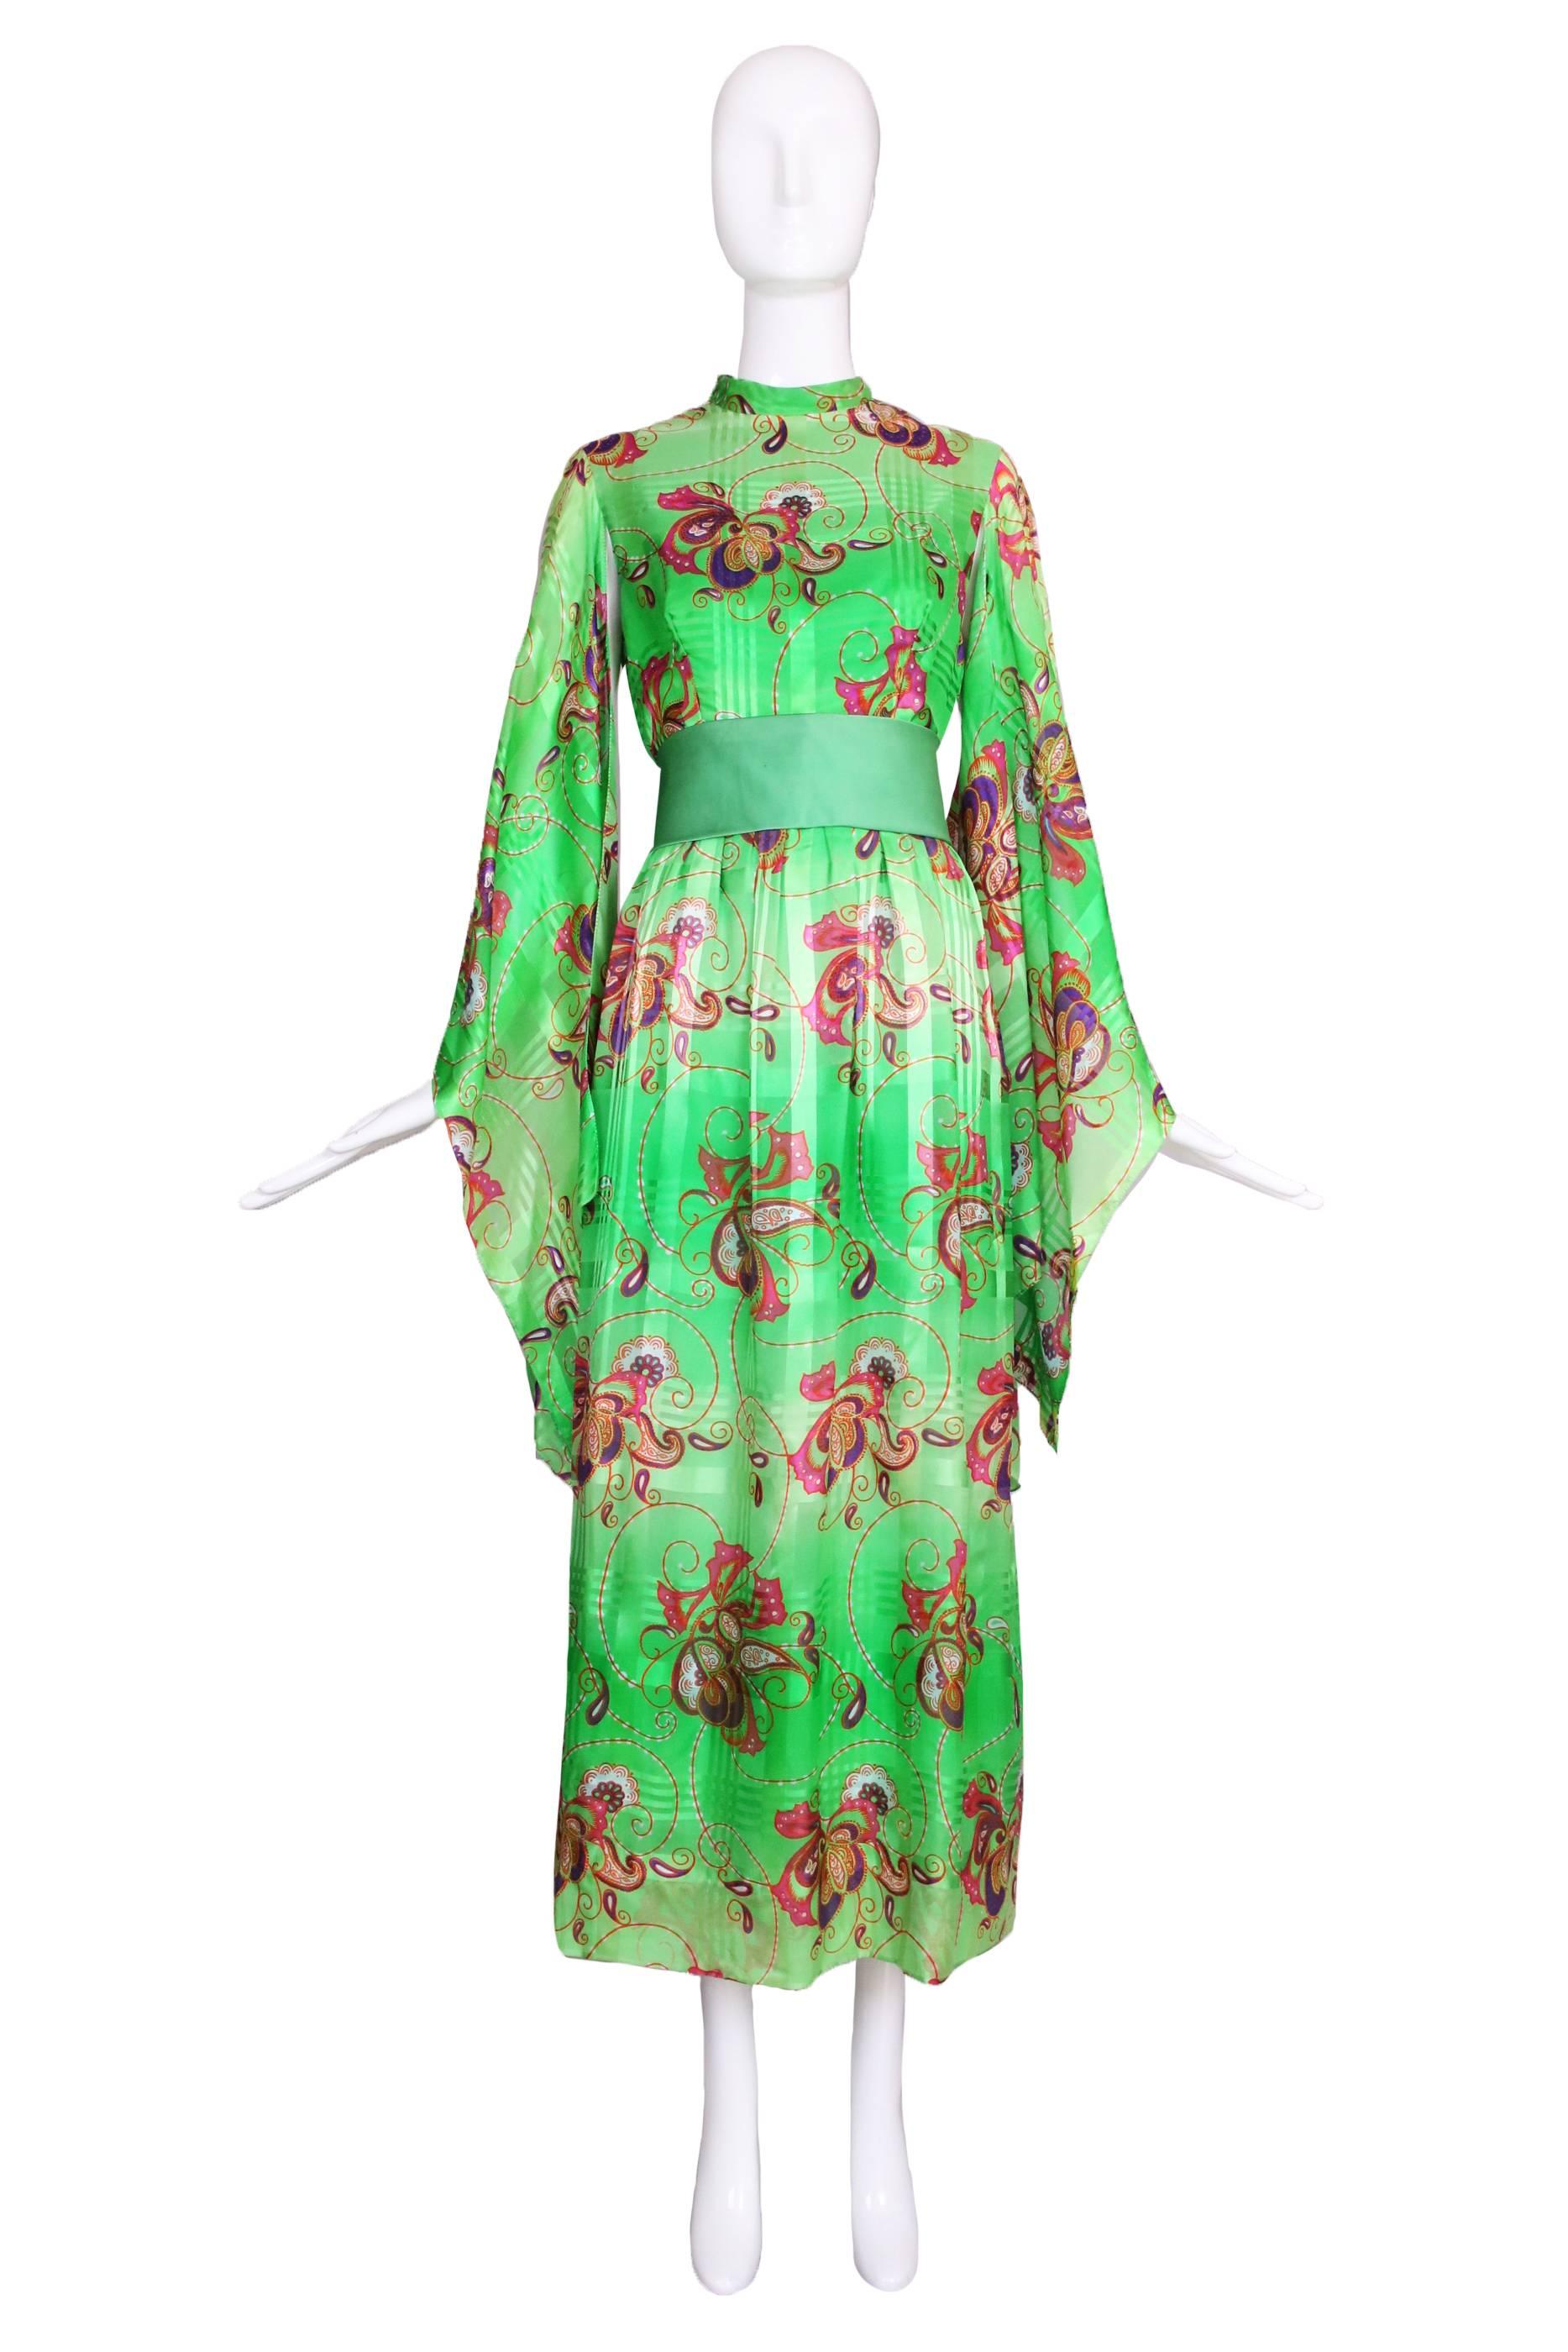 Mollie Parnis green abstract paisley print silk maxi dress with wide satin belt at waist and long angel wing sleeves. In excellent condition - no size tag please see measurements.
MEASUREMENTS:
Bust - 36